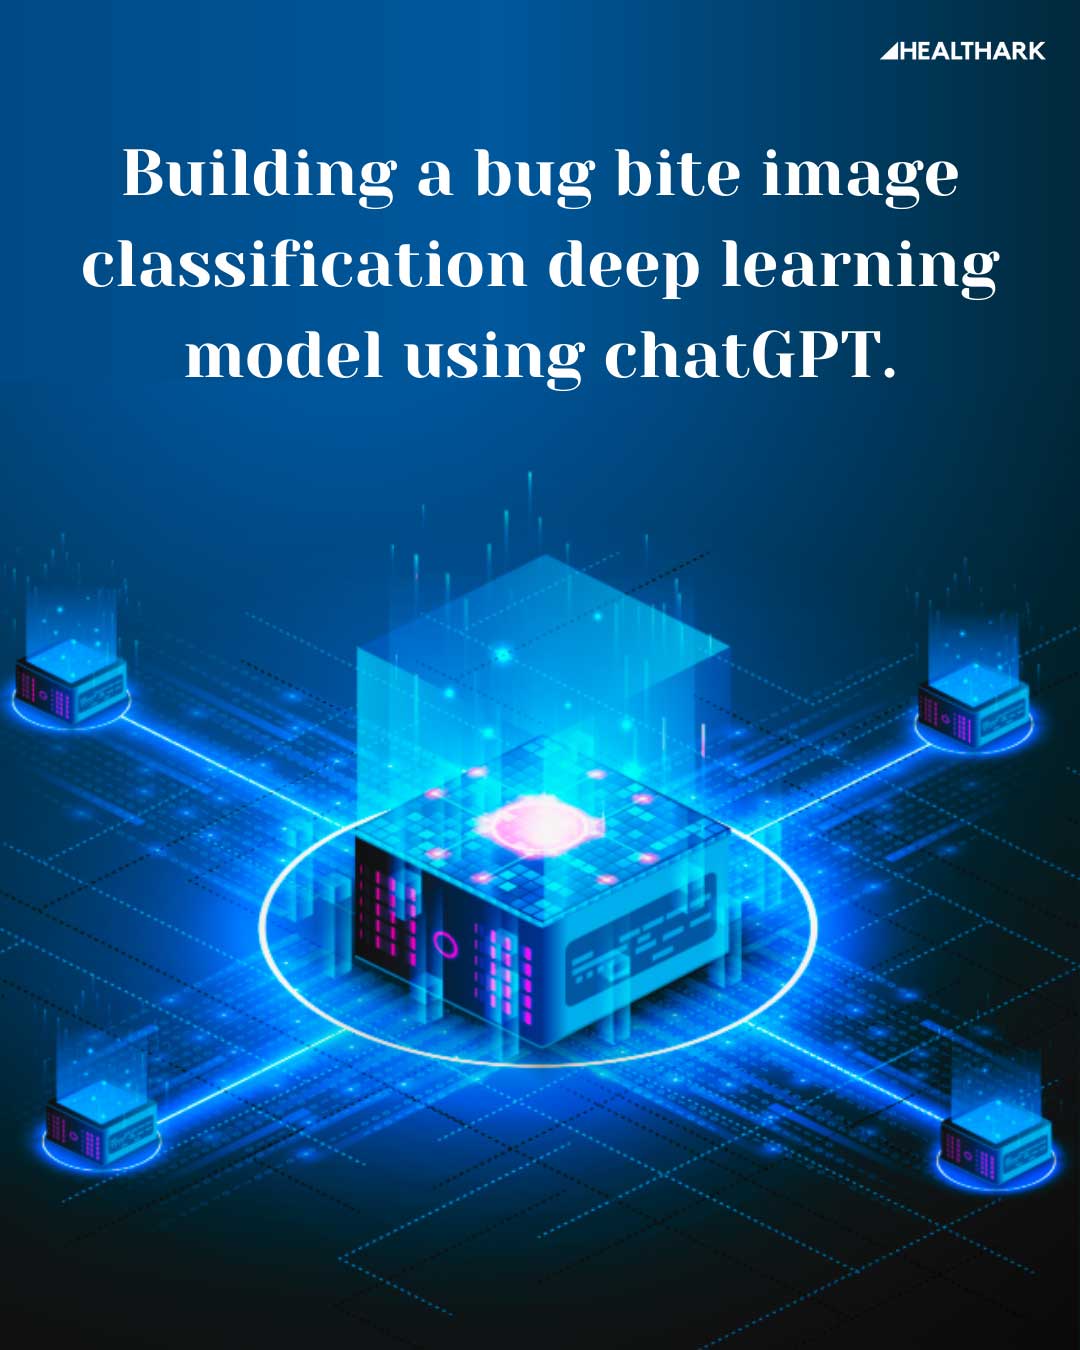 Building a bug bite image classification deep learning model using chatGPT.